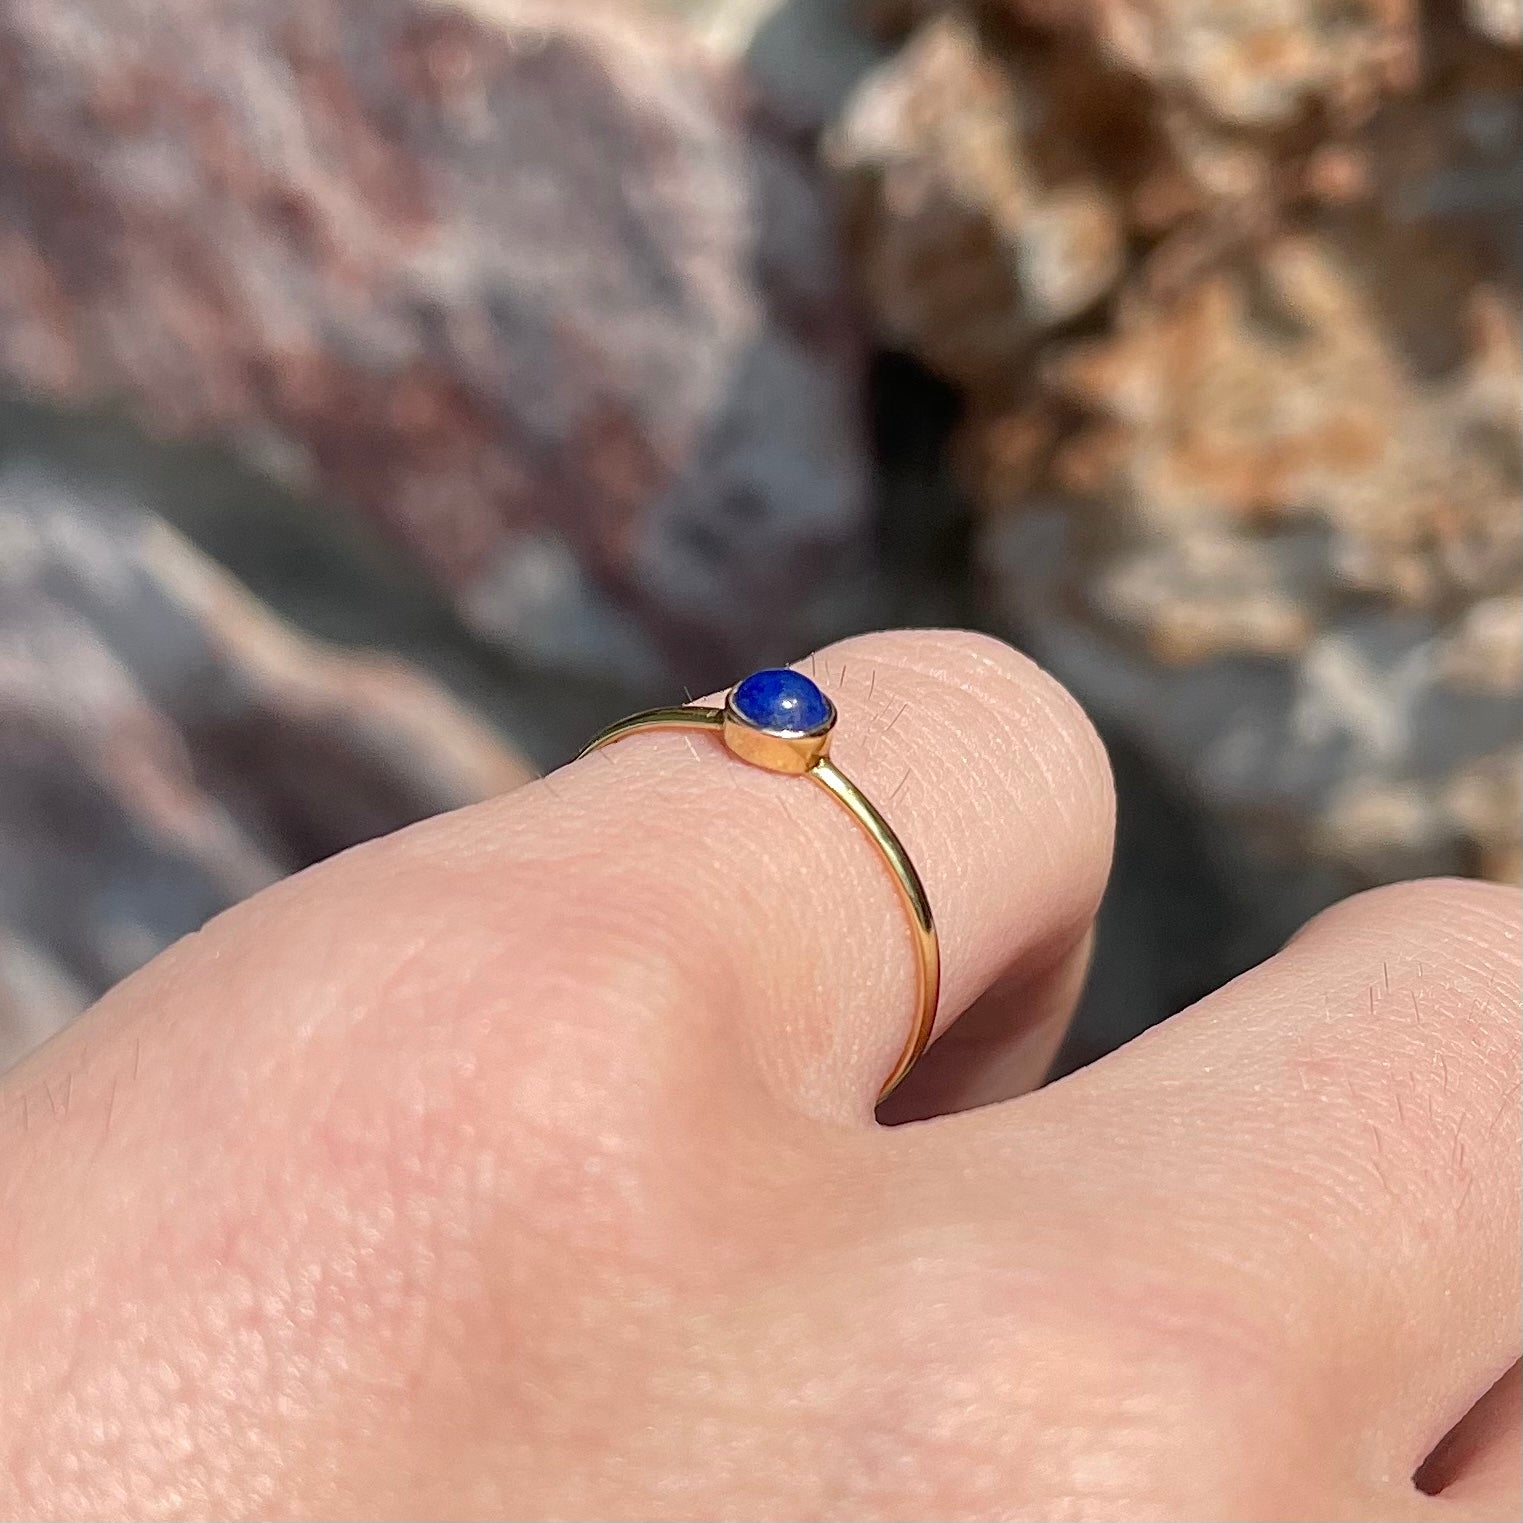 Round cabochon cut blue lapis lazuli stone set in a dainty simple yellow gold solitaire ring.